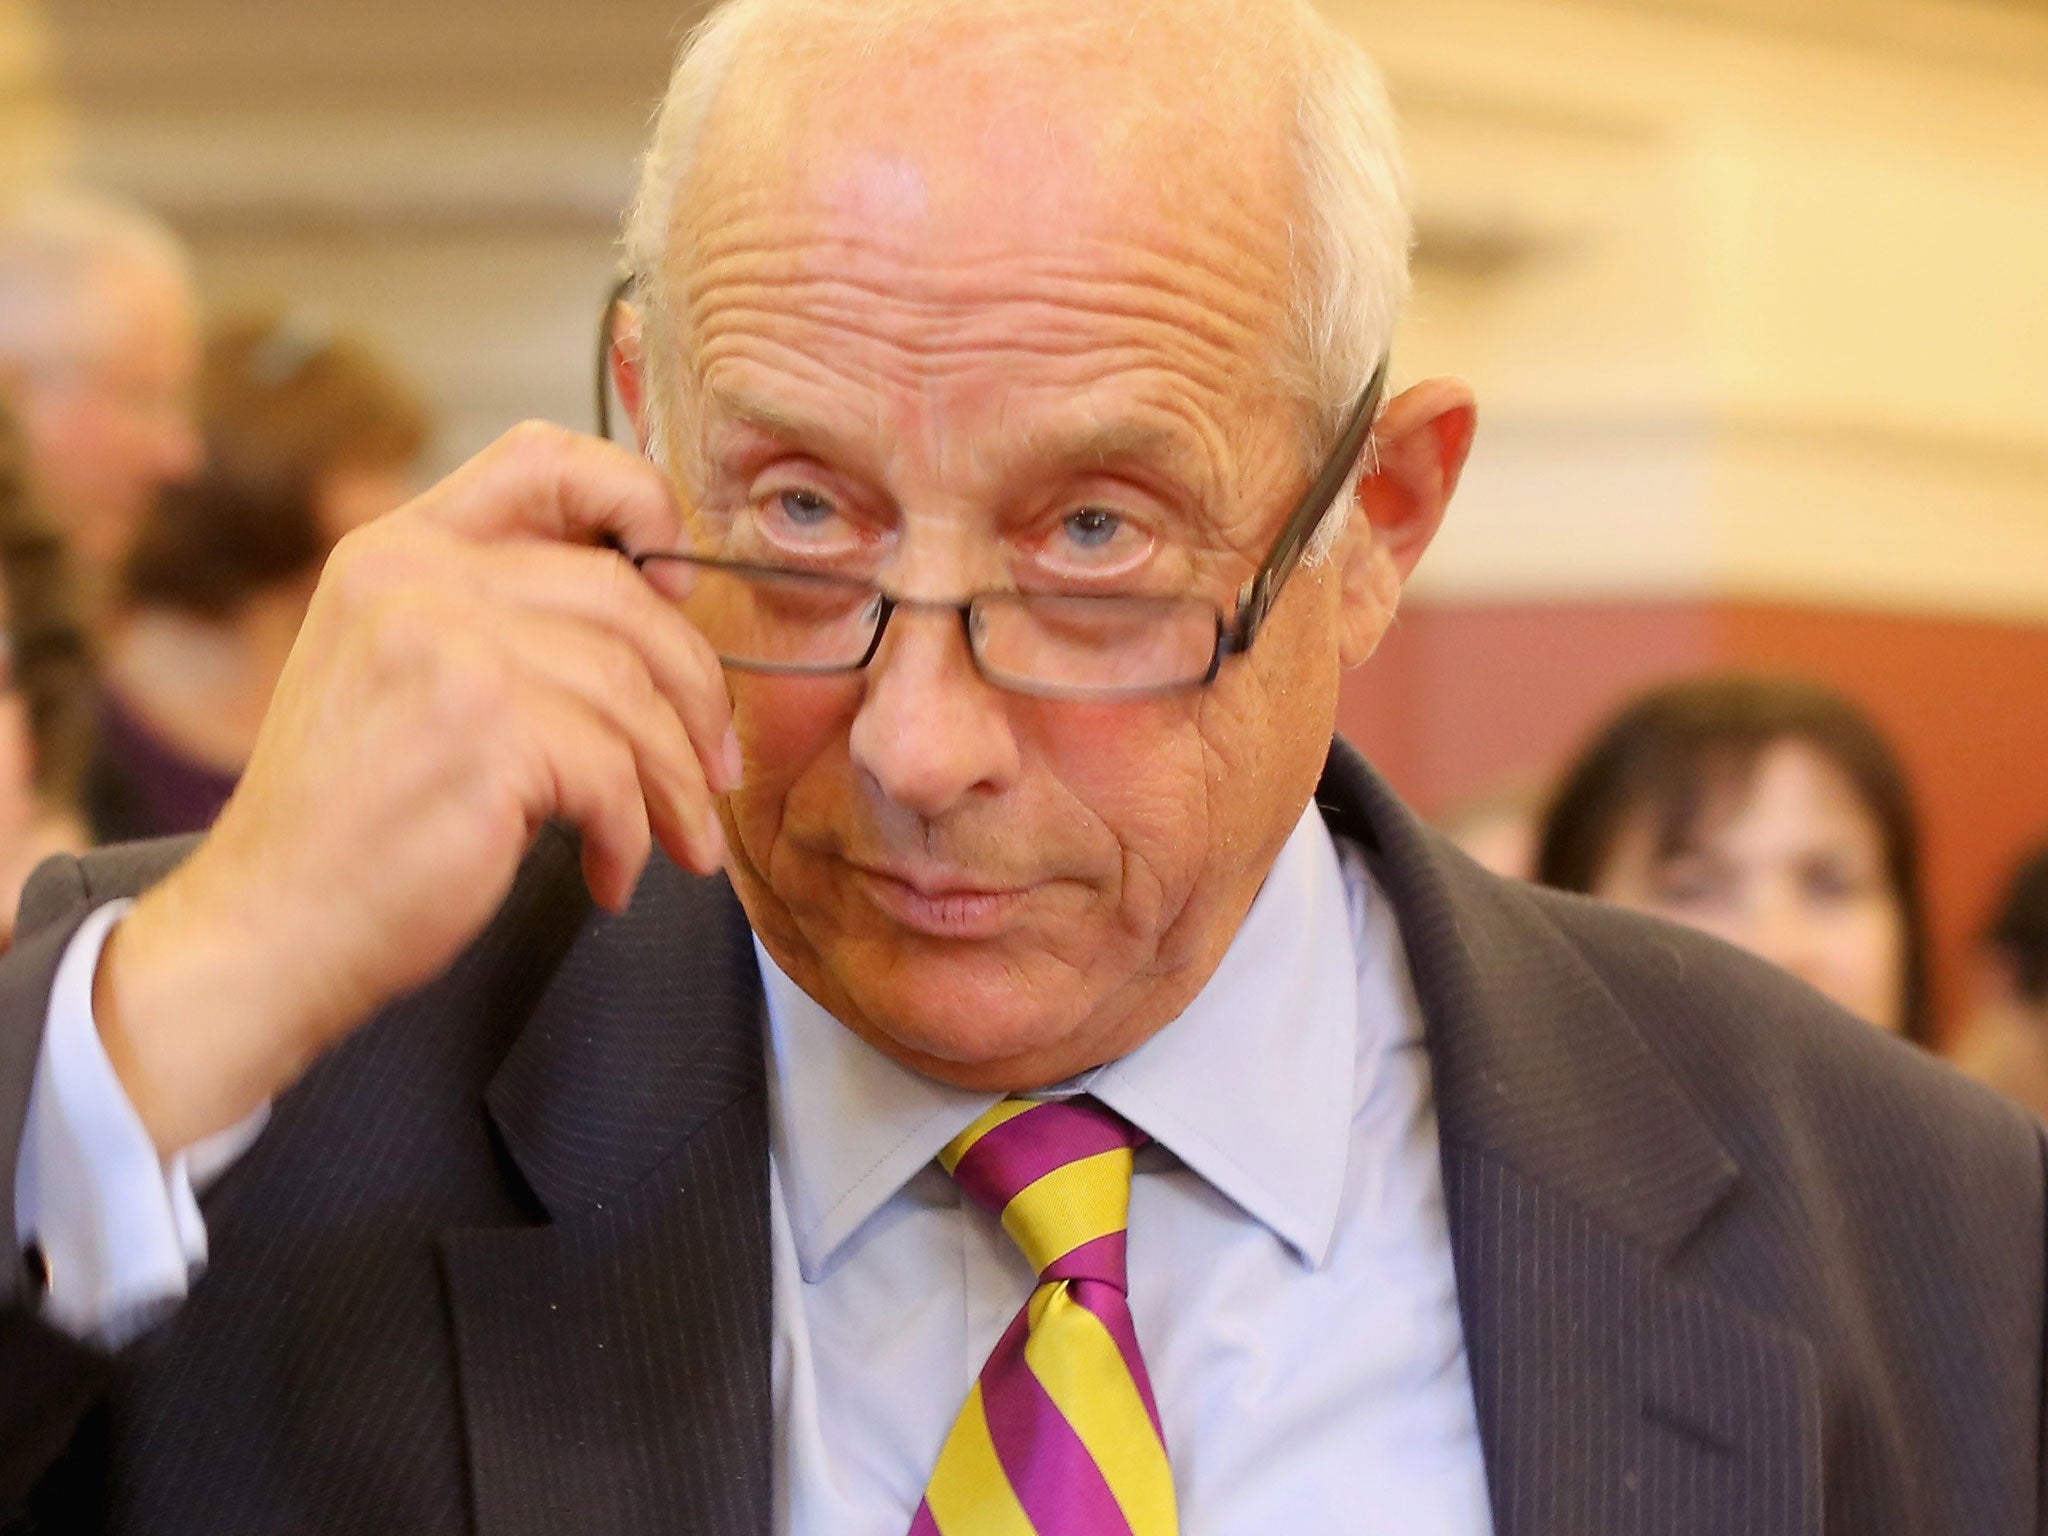 Godfrey Bloom quit Ukip after being banned from speaking at events